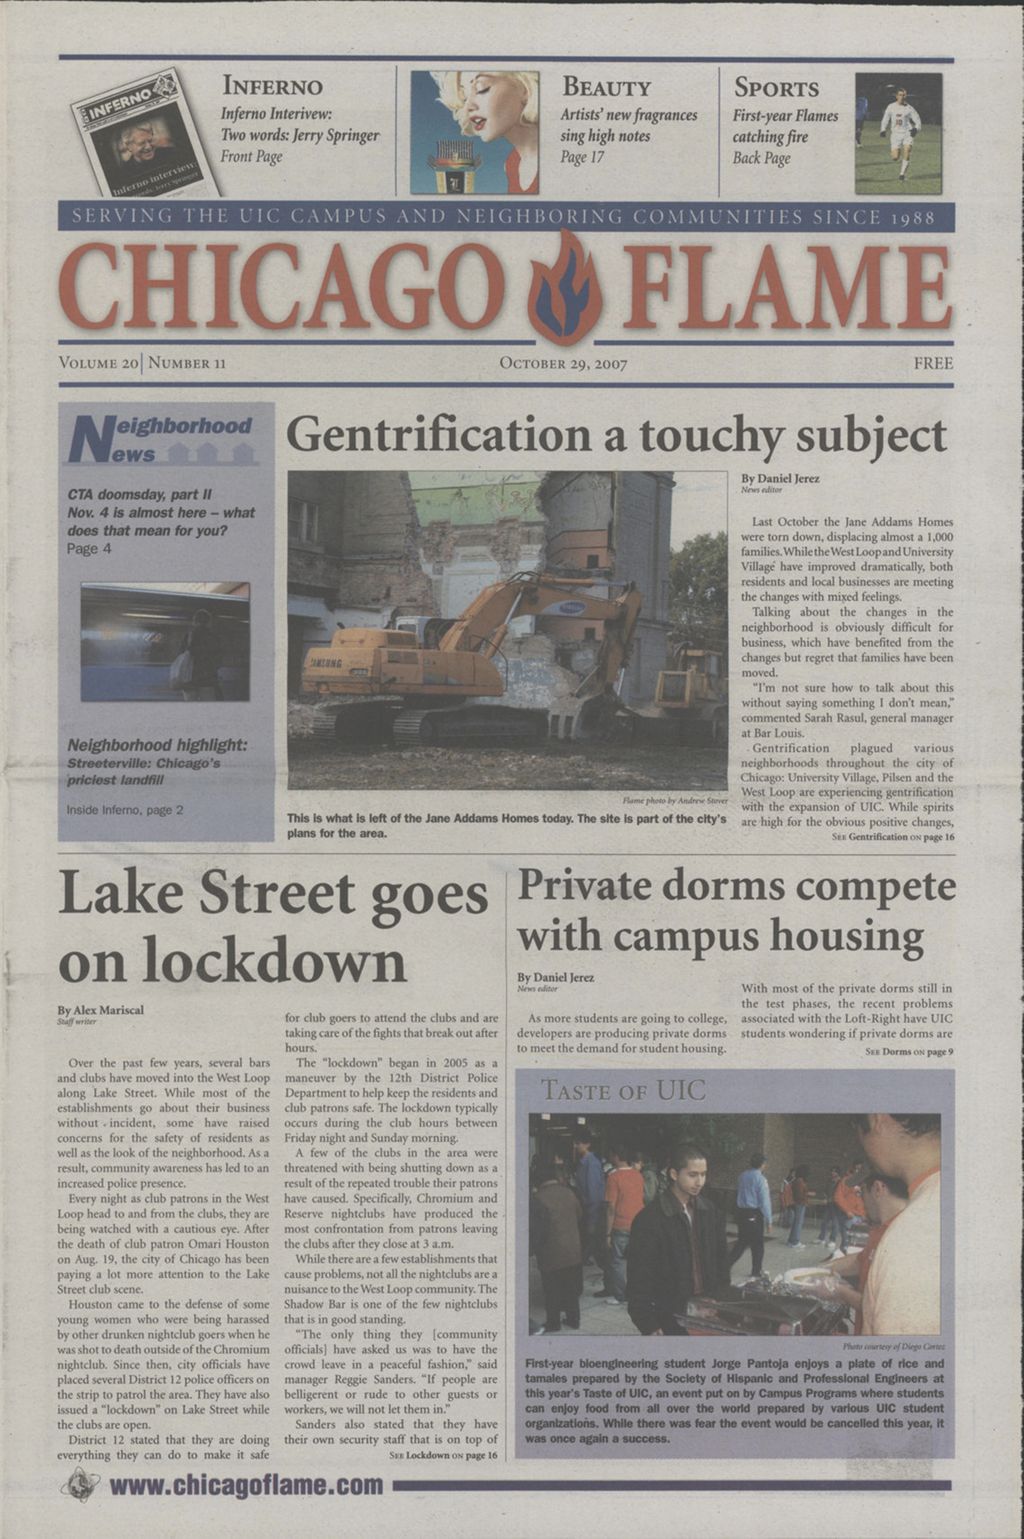 Chicago Flame (October 29, 2007)